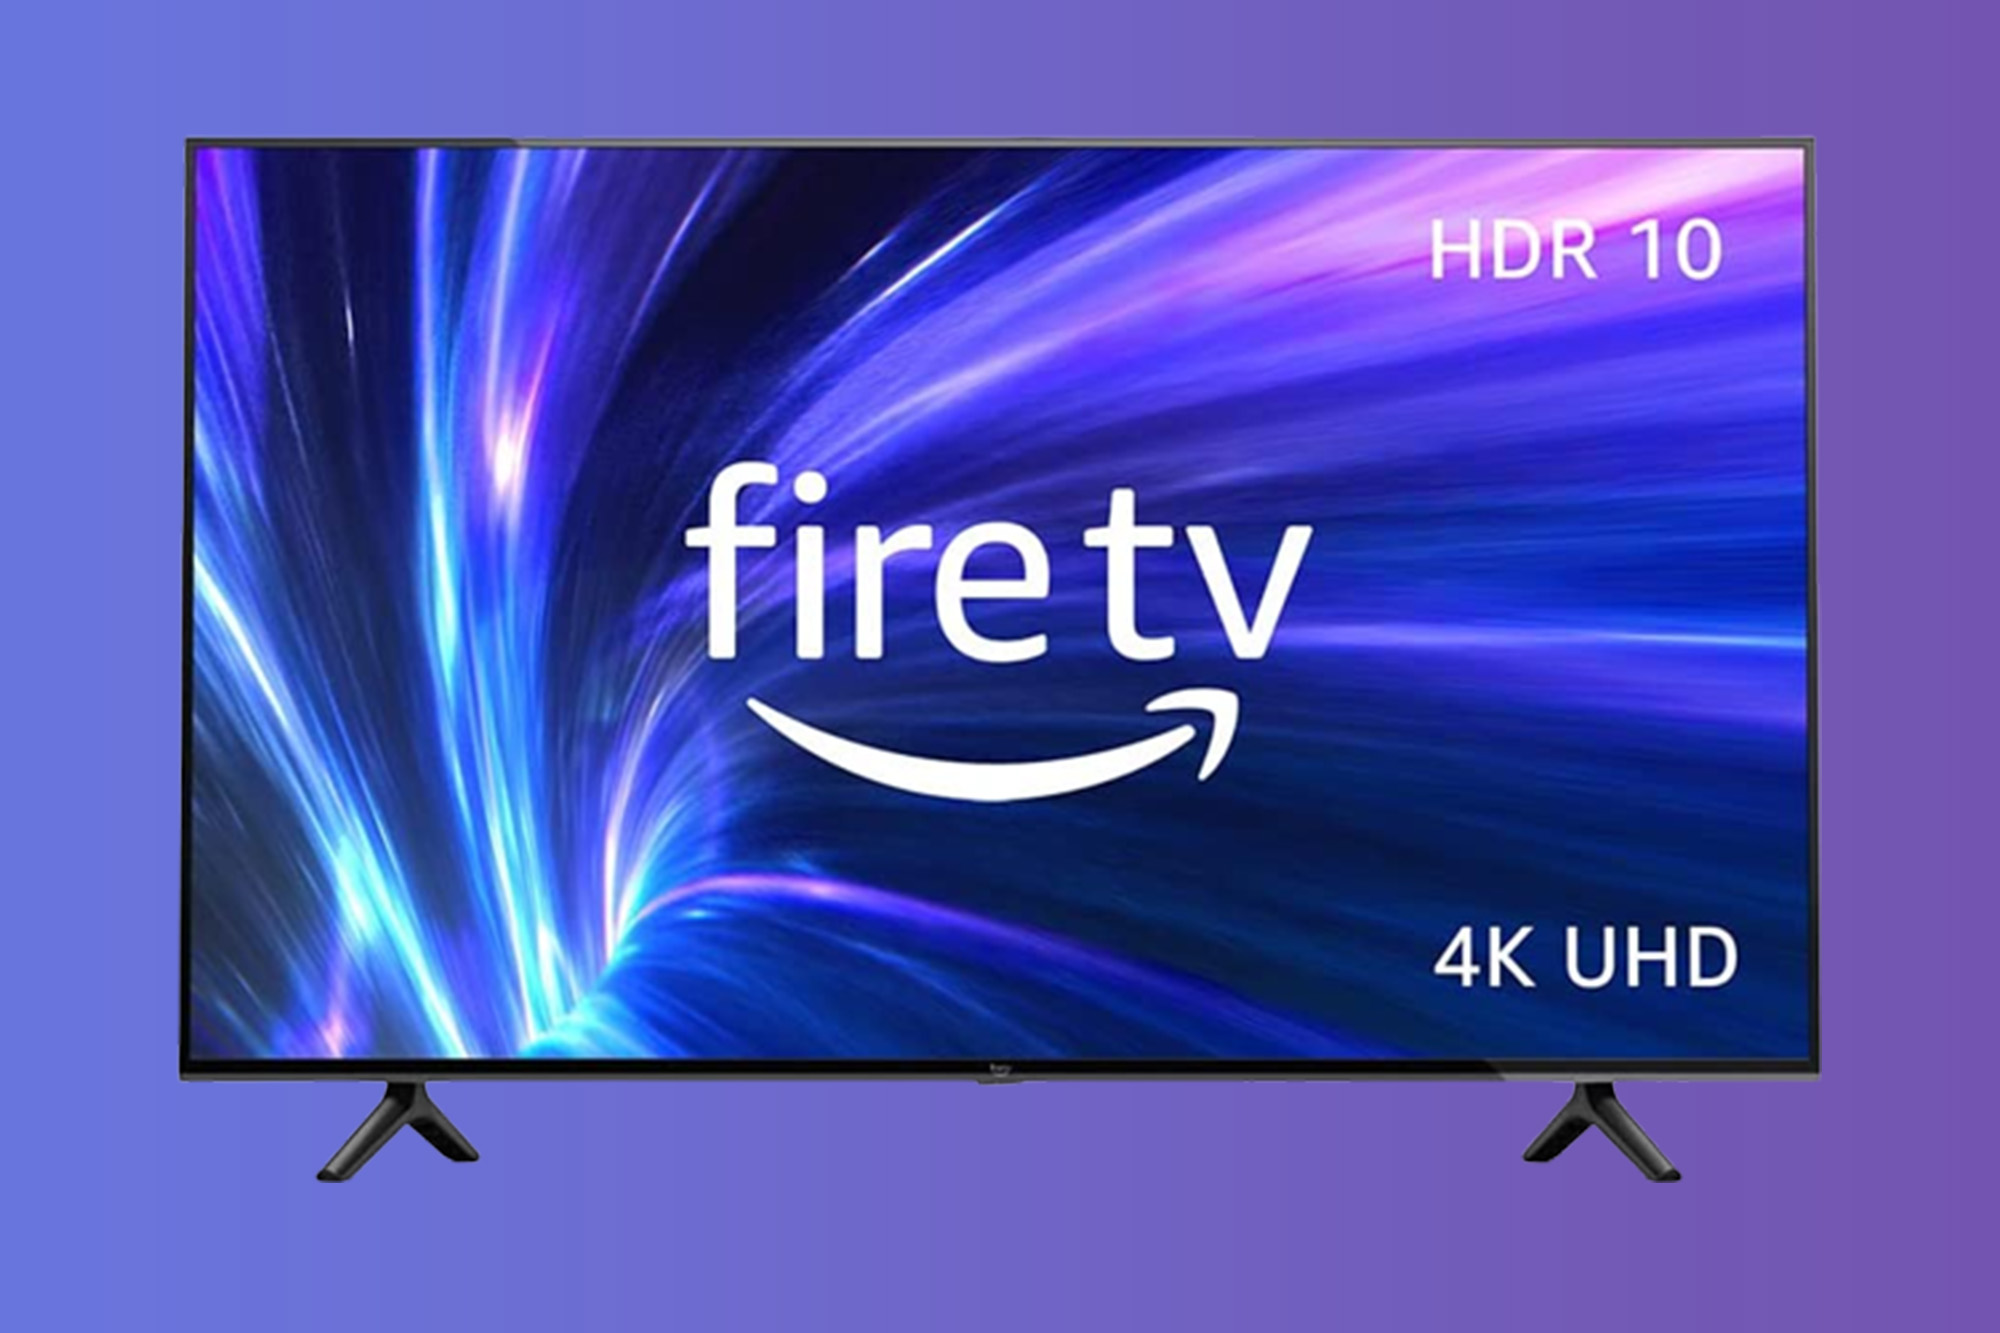 Get cool savings on hot TVs with up to 30% off select Amazon Fire models